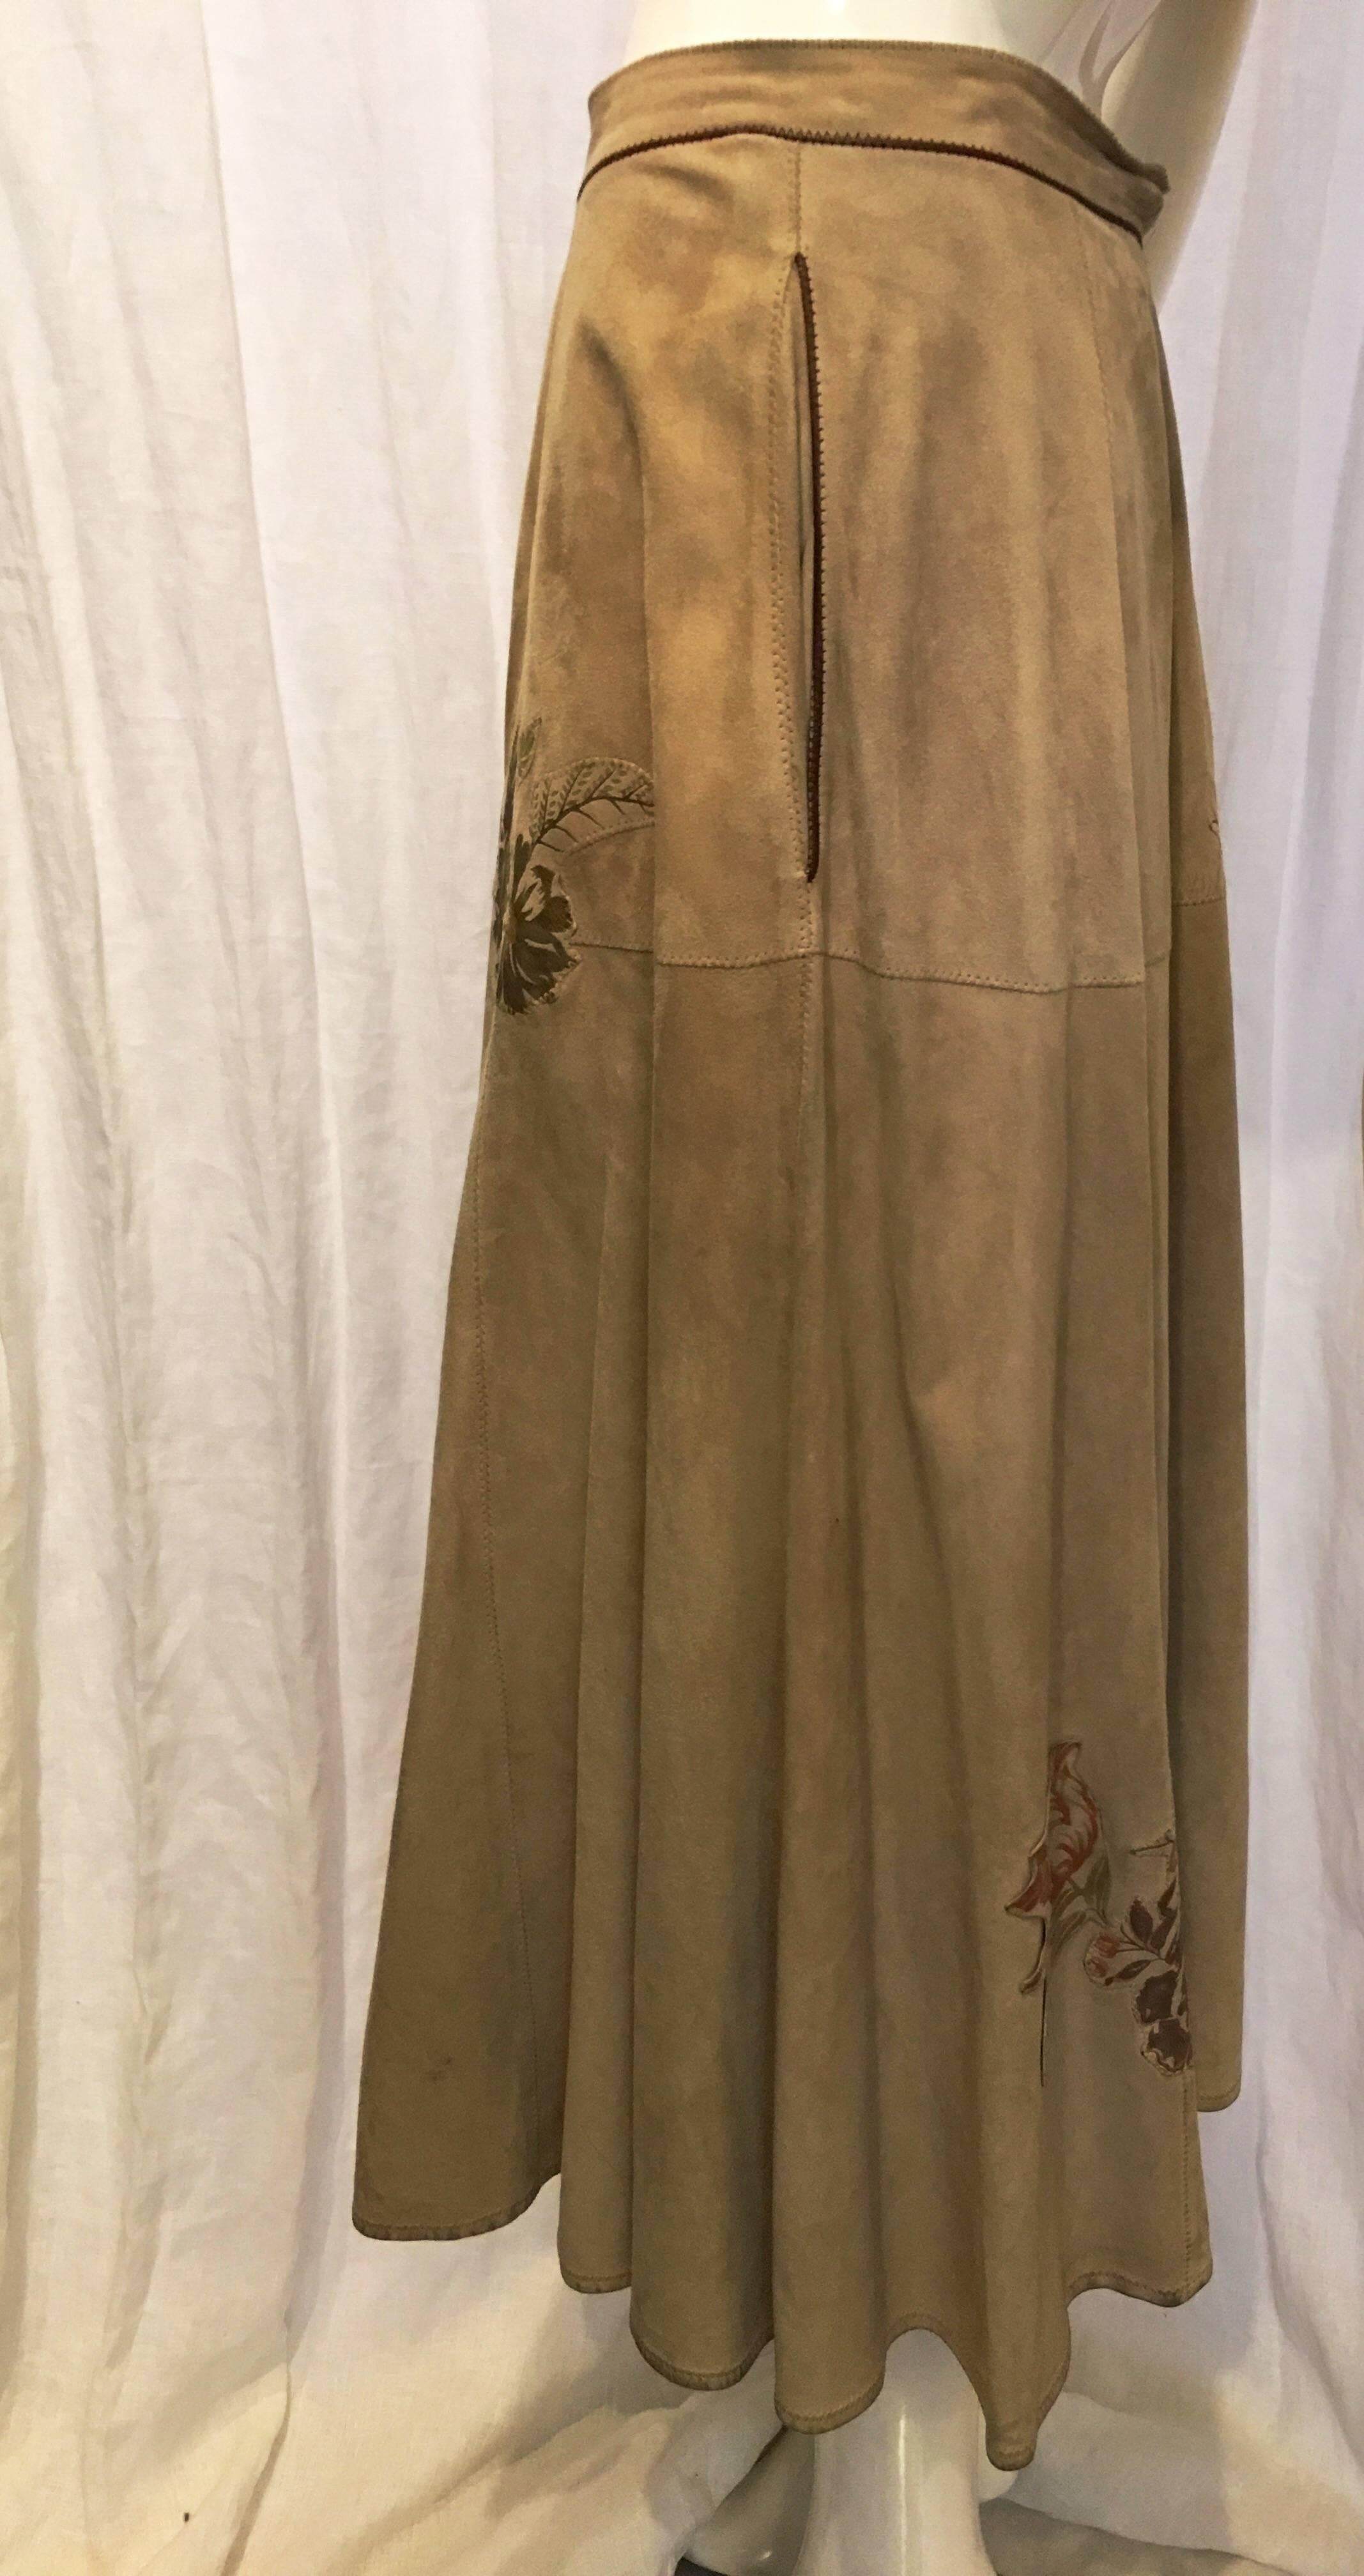 Tan suede skirt with floral patches. Two front pockets. Front zip and snap floral button. A line style fit. Back of garment goes out slightly at the waist. Some slight discoloration and wear to the suede as a result of age. Please note pictures for